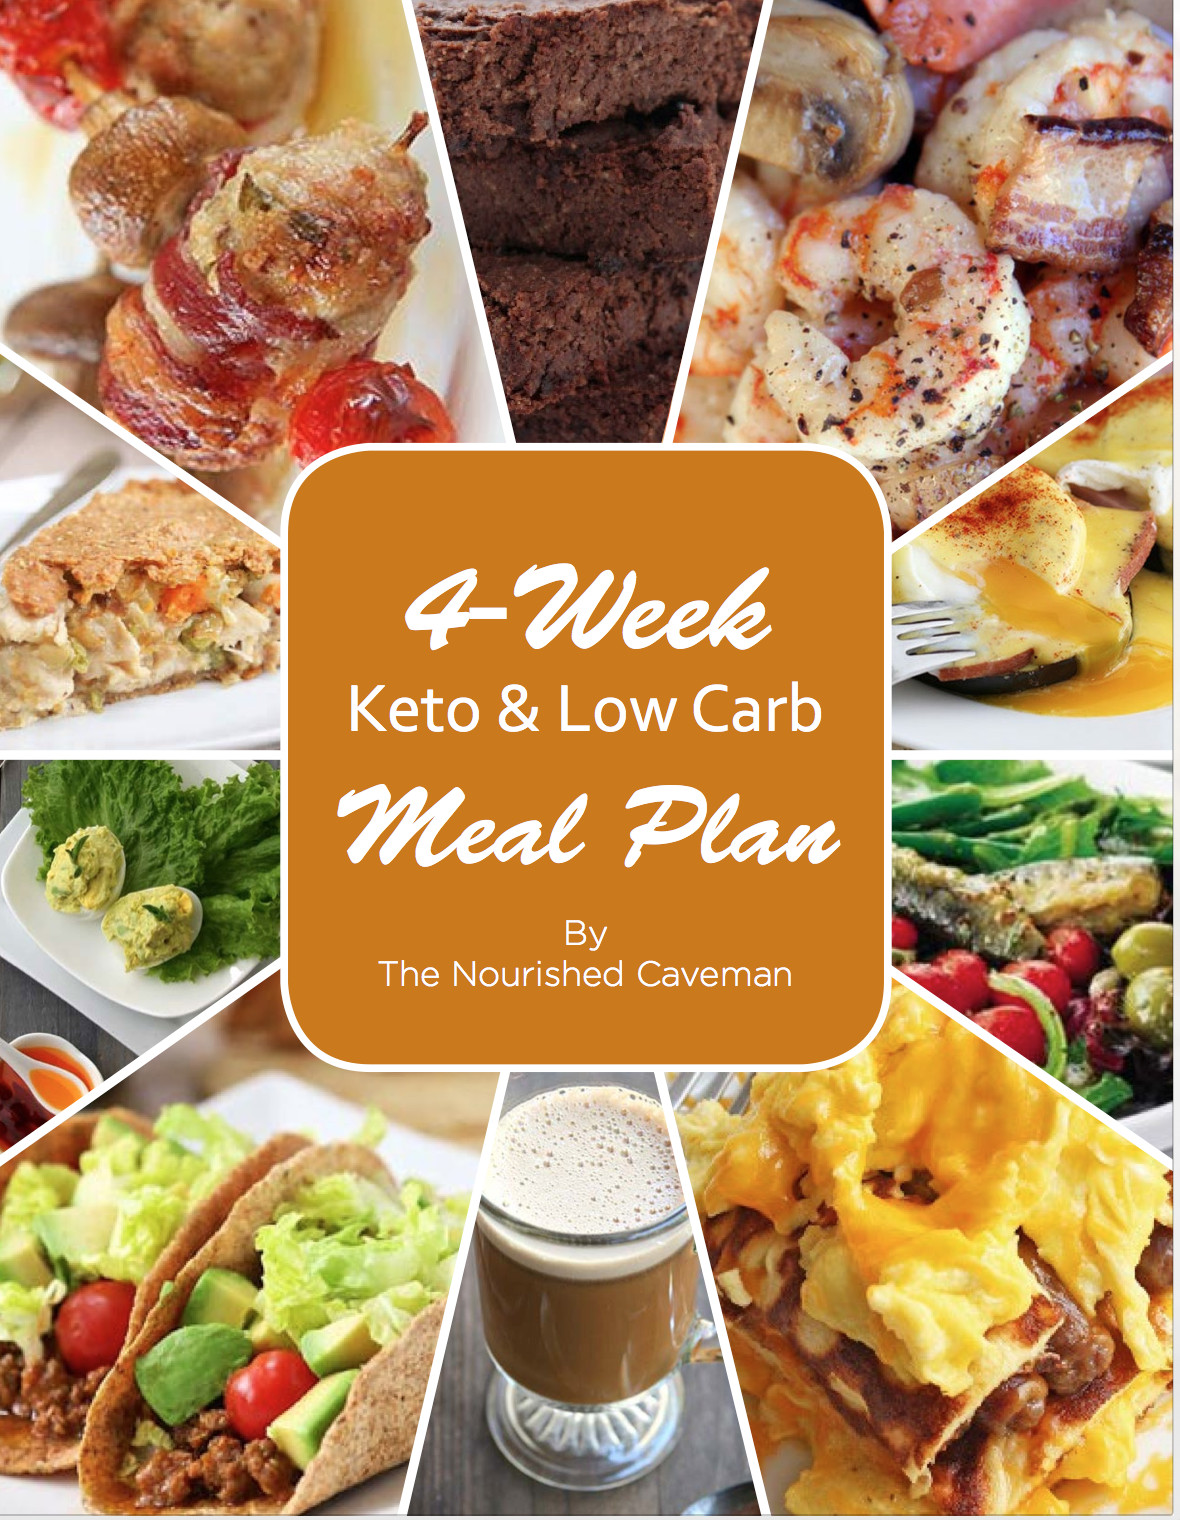 Keto Diet Recipes Dinners Low Carb
 4 Week Keto & Low Carb Meal Plan The Nourished Caveman